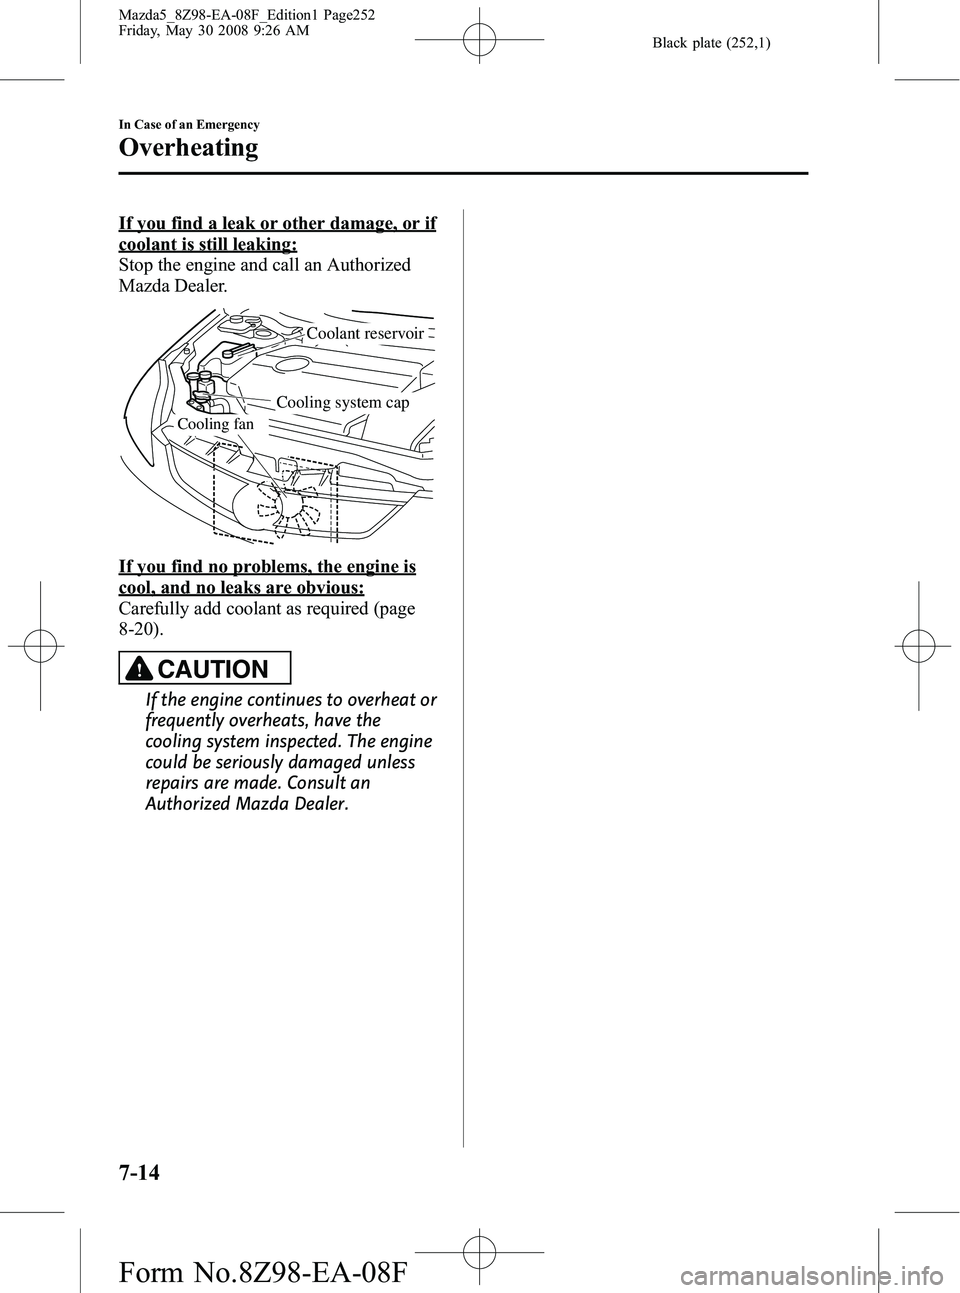 MAZDA MODEL 5 2009  Owners Manual Black plate (252,1)
If you find a leak or other damage, or if
coolant is still leaking:
Stop the engine and call an Authorized
Mazda Dealer.
Cooling fan
Coolant reservoir
Cooling system cap
If you fin